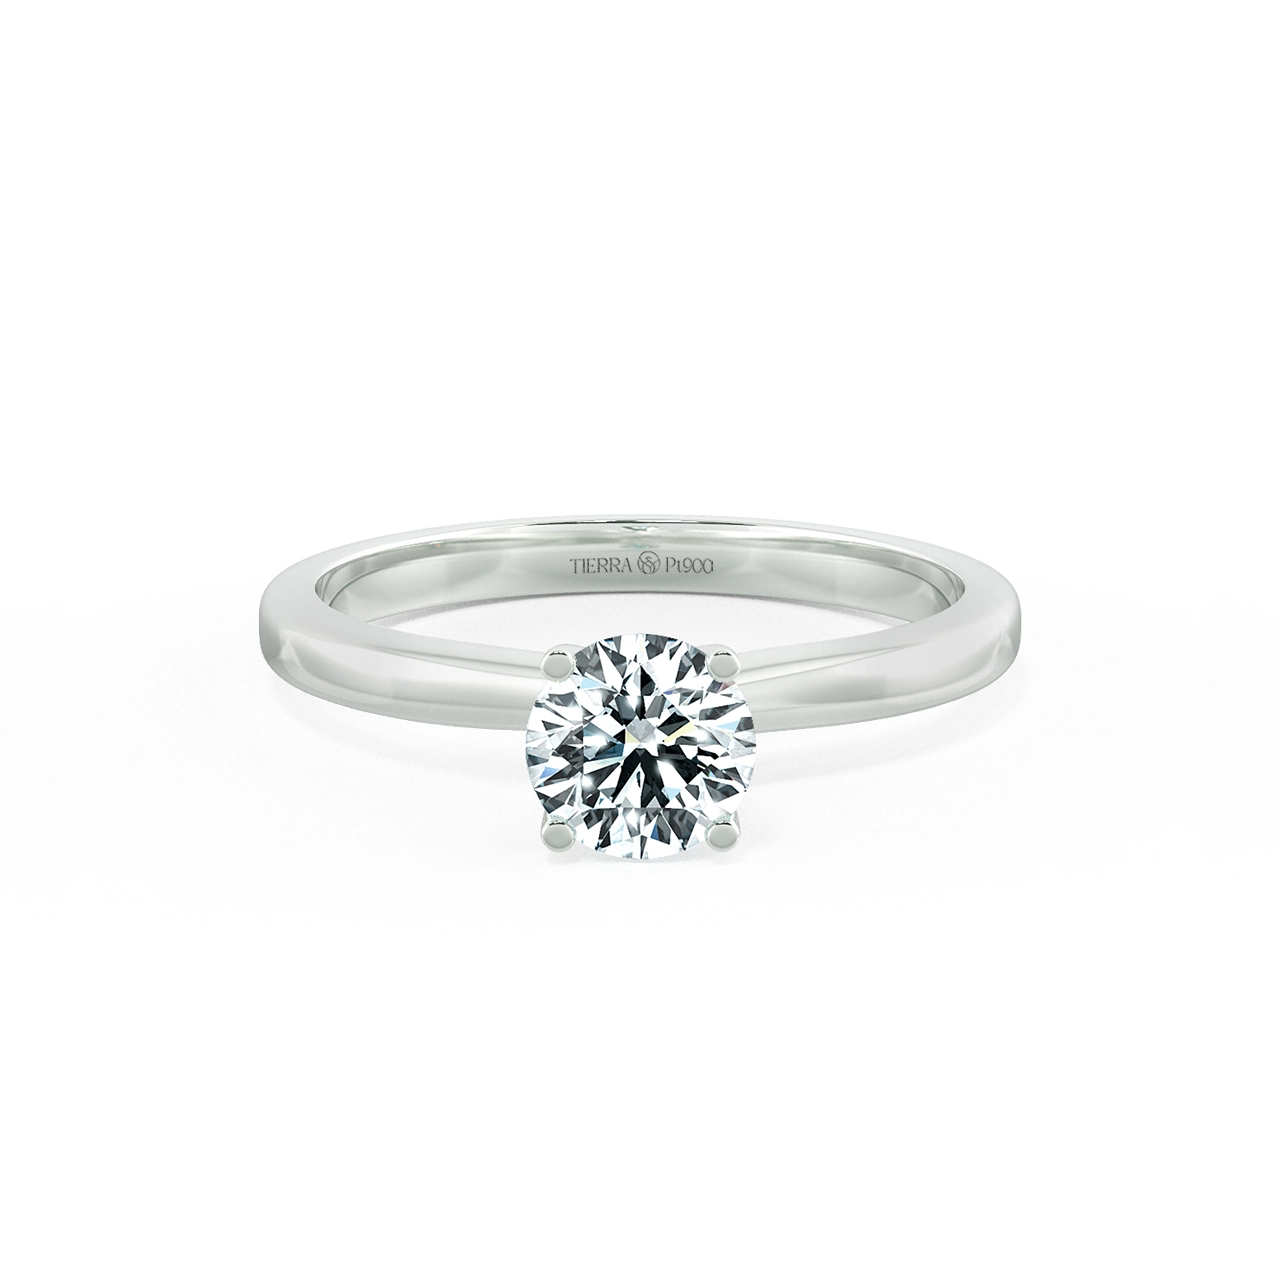 Simple Four Prongs Trellis Engagement Ring NCH1401 1